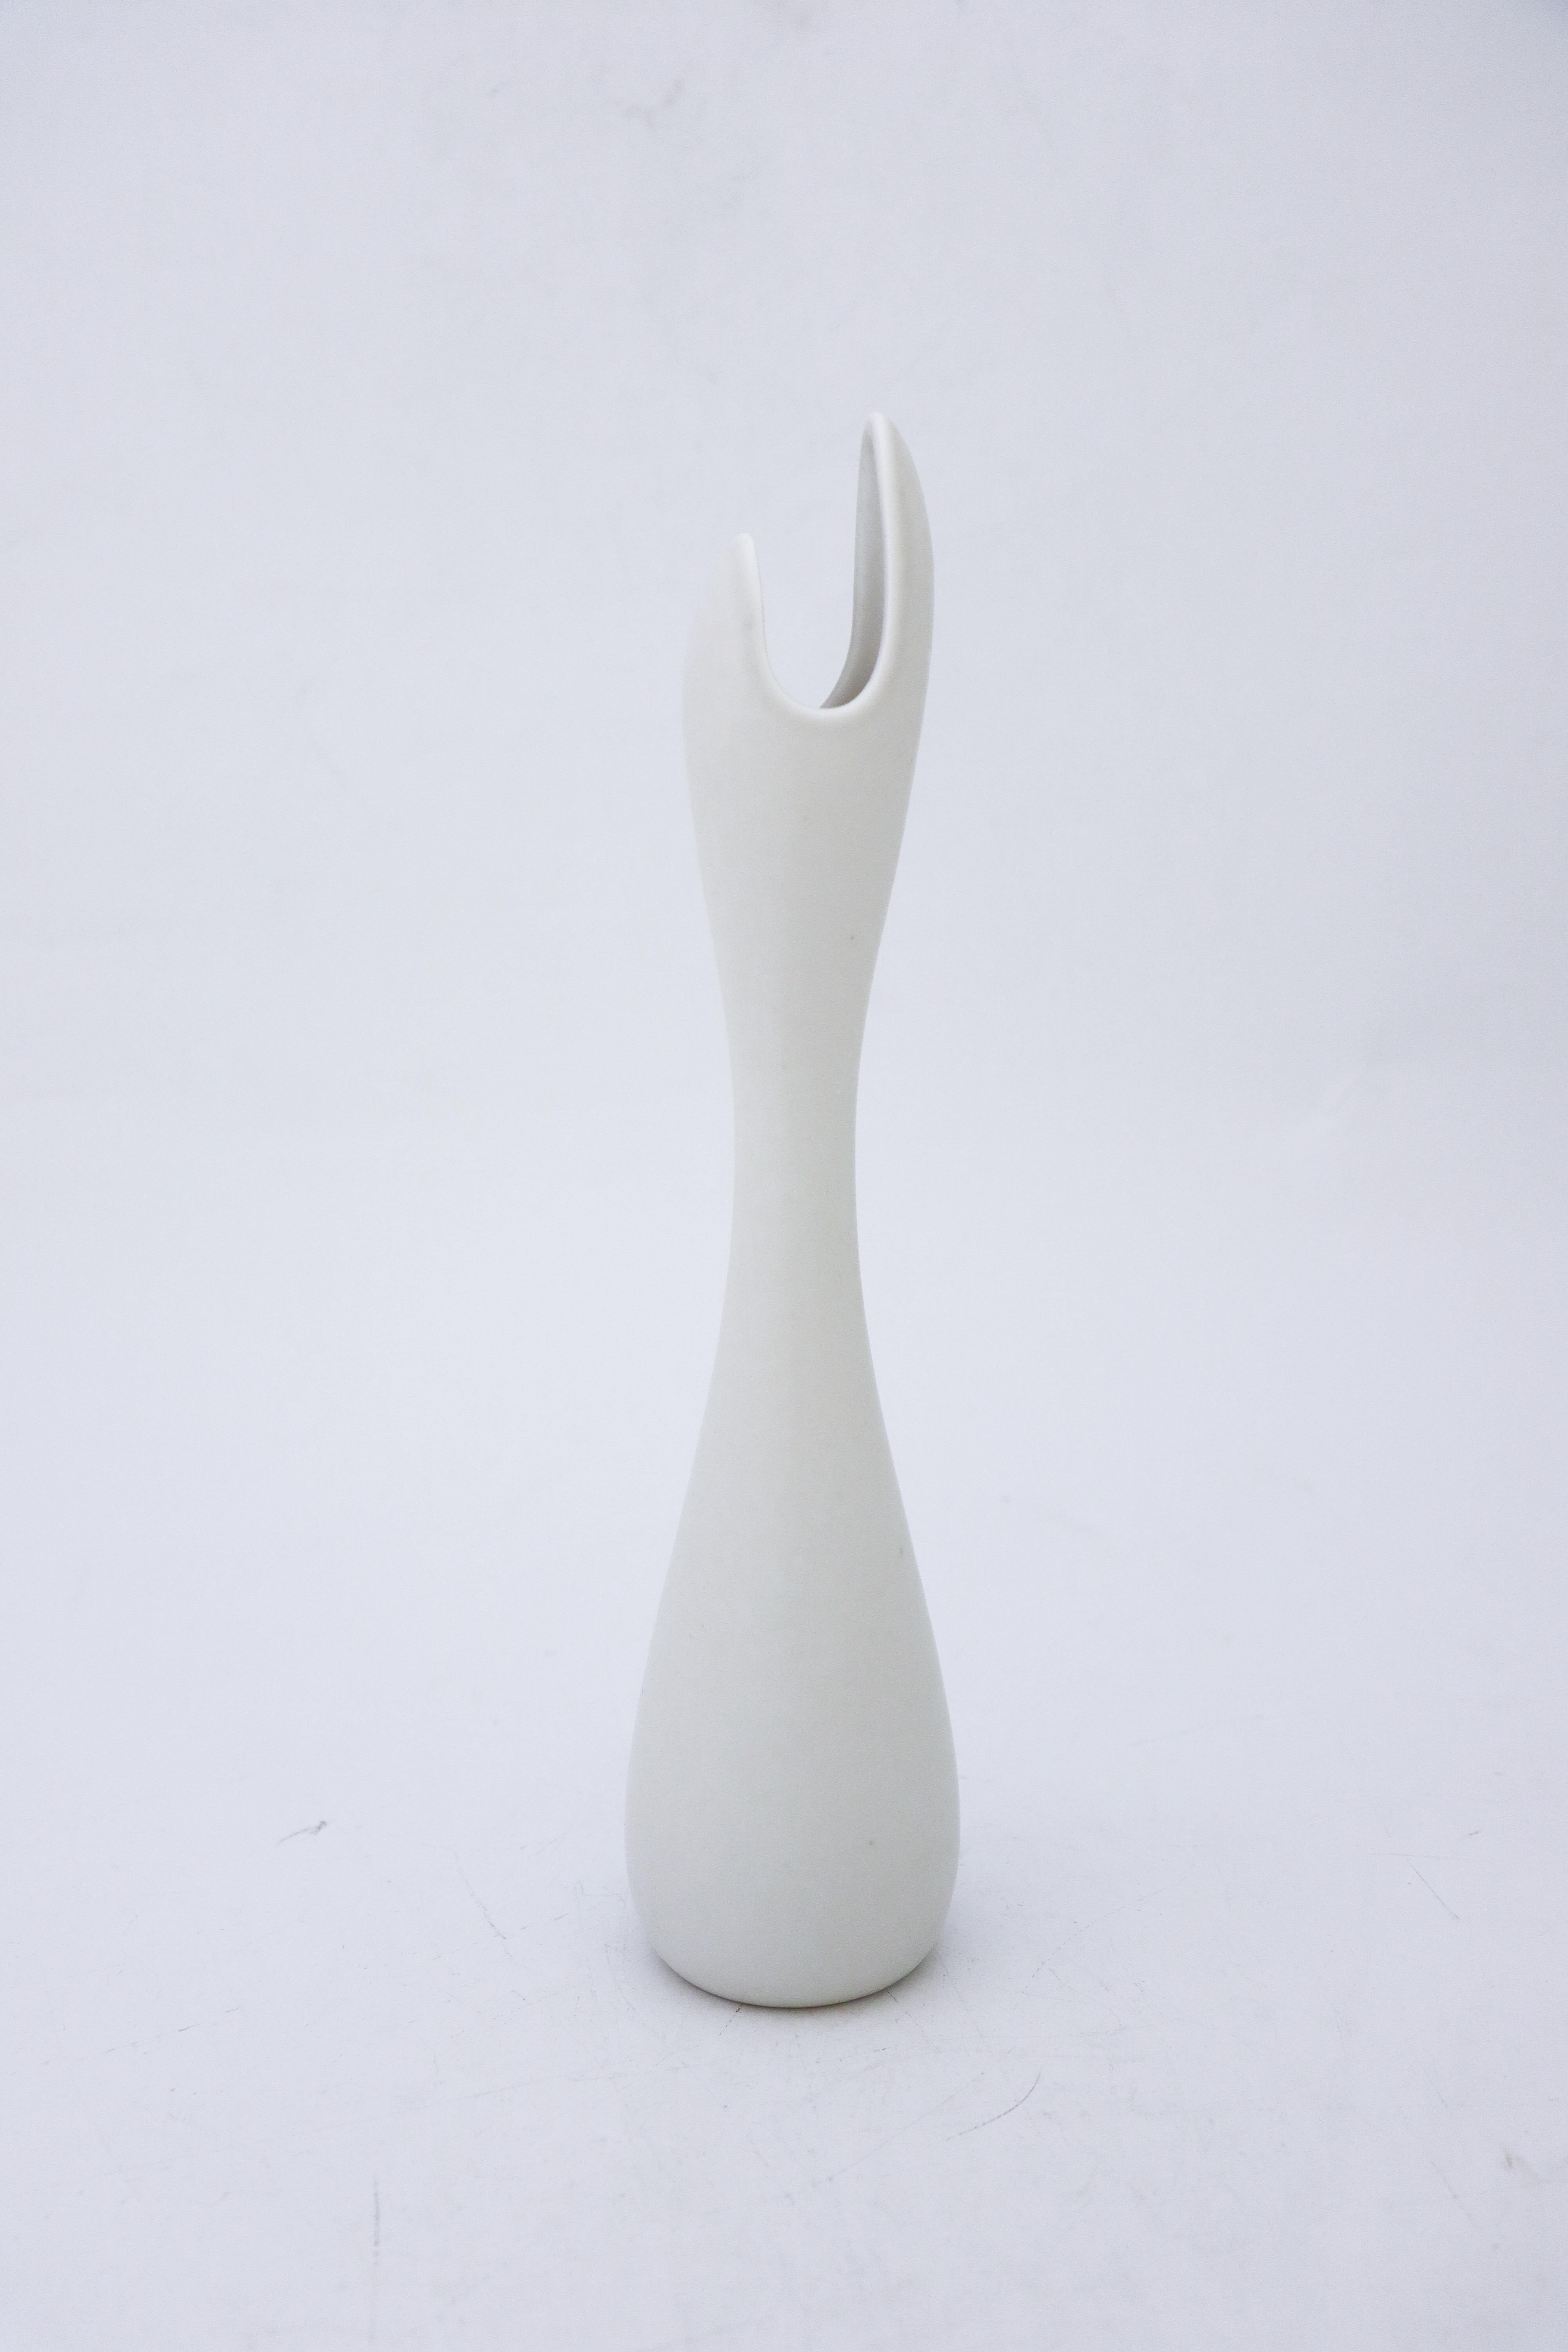 A lovely white vase designed by Gunnar Nylund at Rörstrand of model Caolina, the vase is 31 cm (12.4